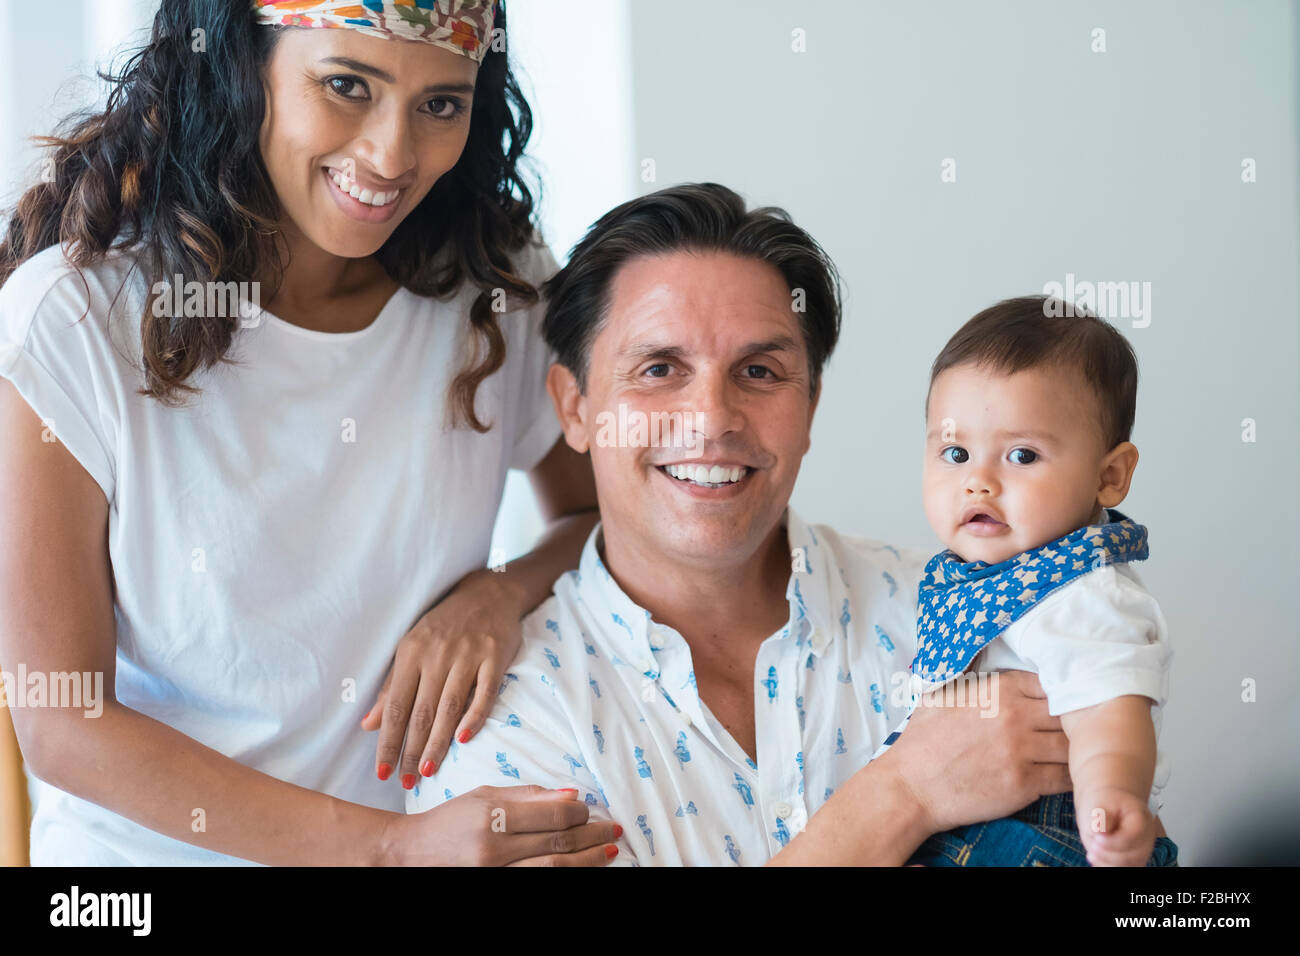 Young family with baby boy smiling at camera Stock Photo